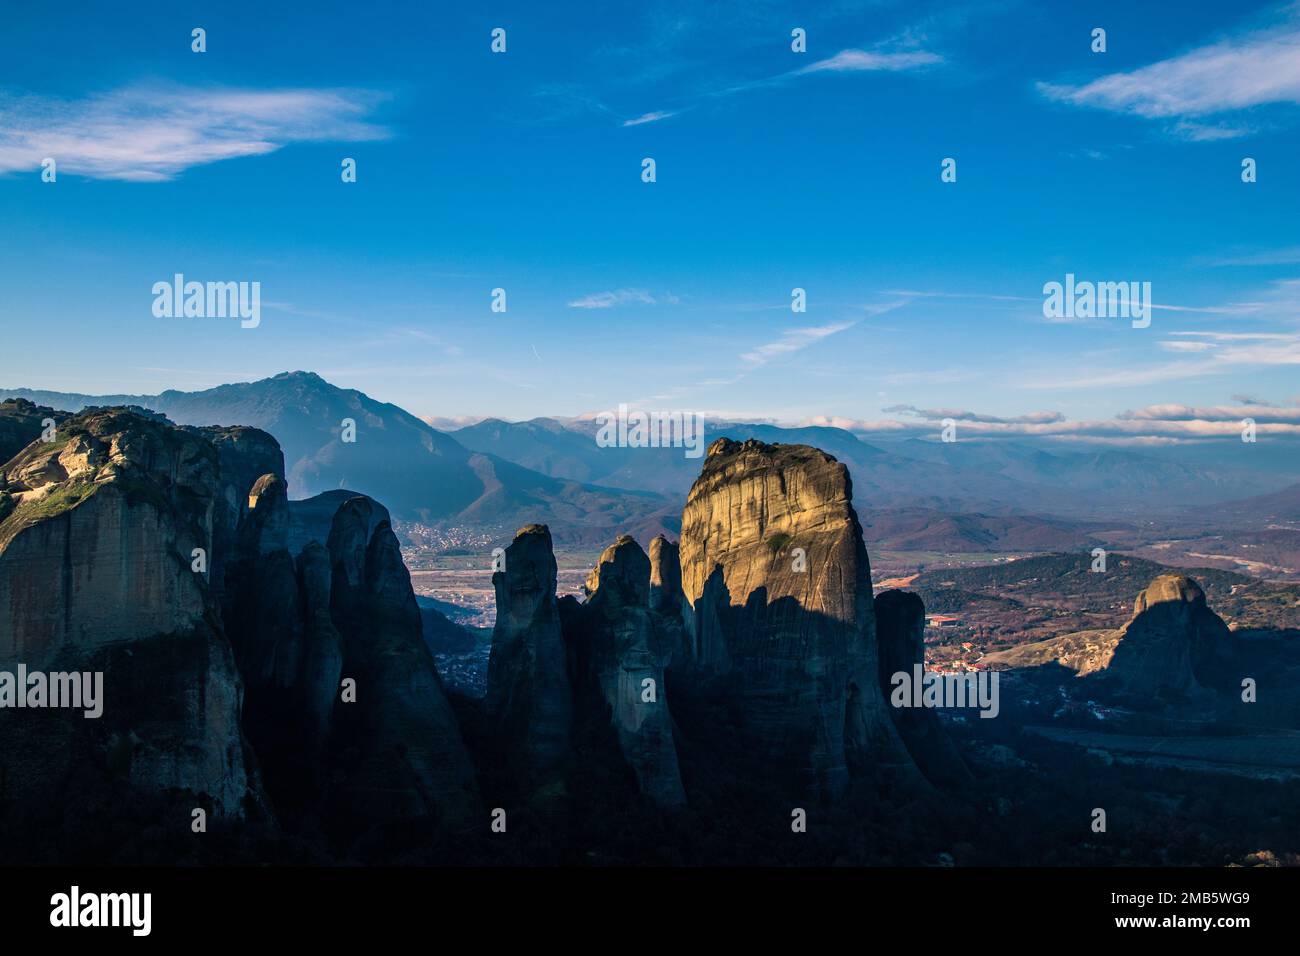 Some mountains with a rare and extremely beautiful shape. Stock Photo